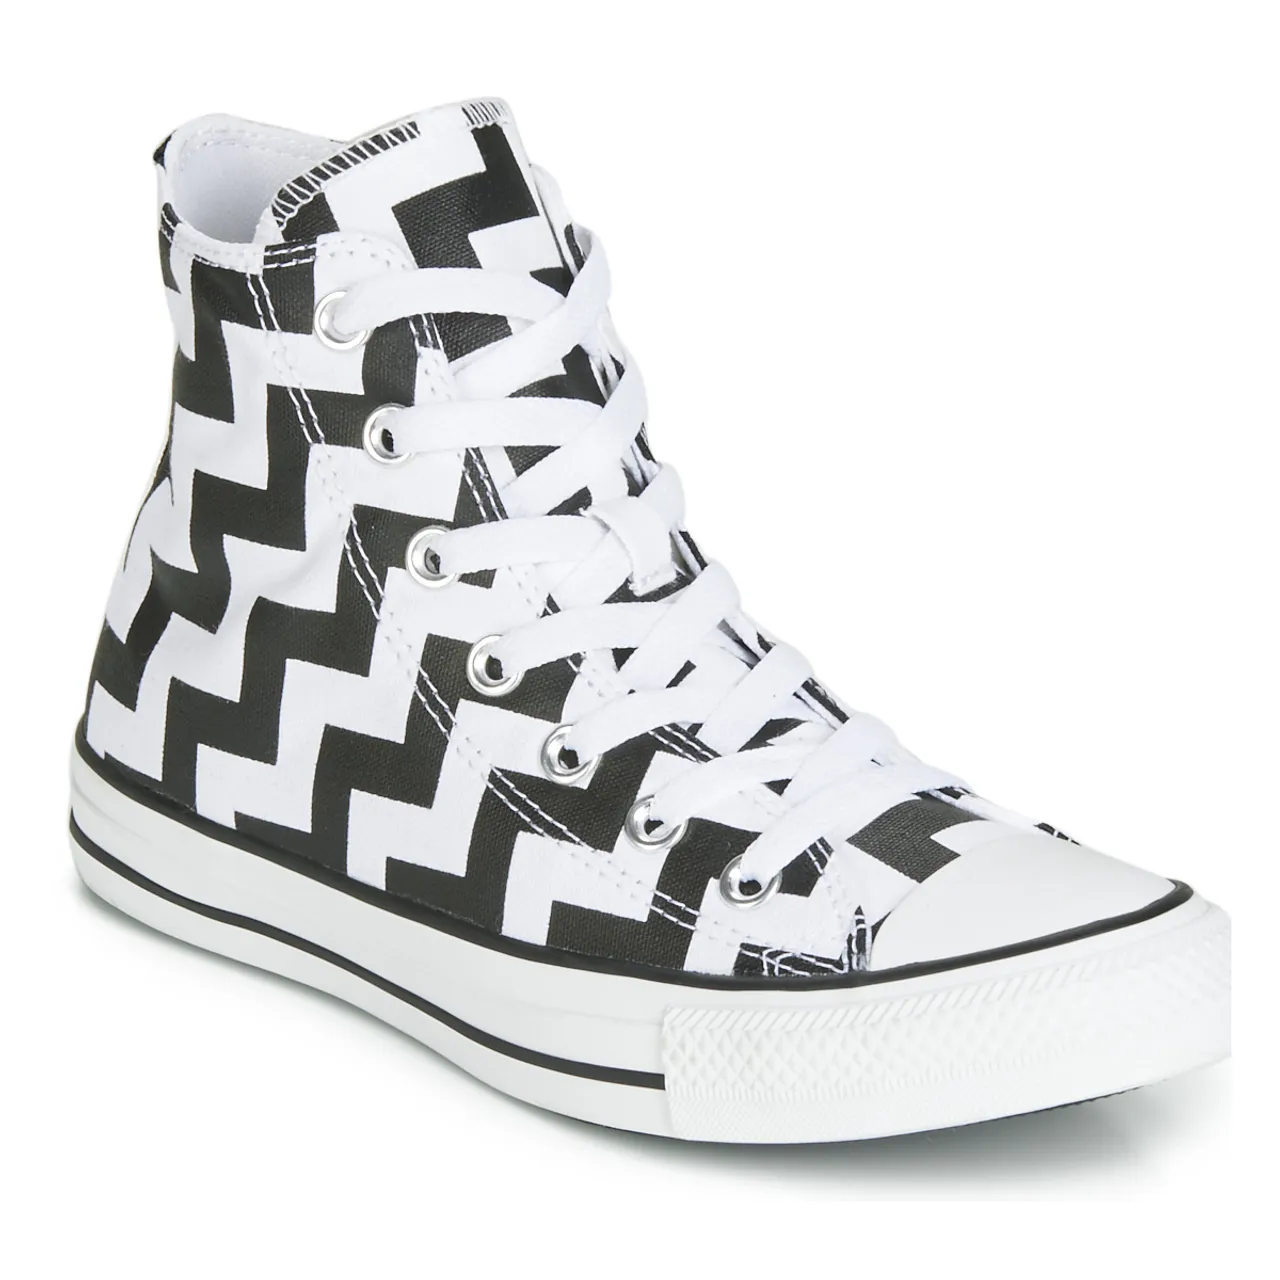 Converse  CHUCK TAYLOR ALL STAR GLAM DUNK CANVAS HI  women's Shoes (High-top Trainers) in White